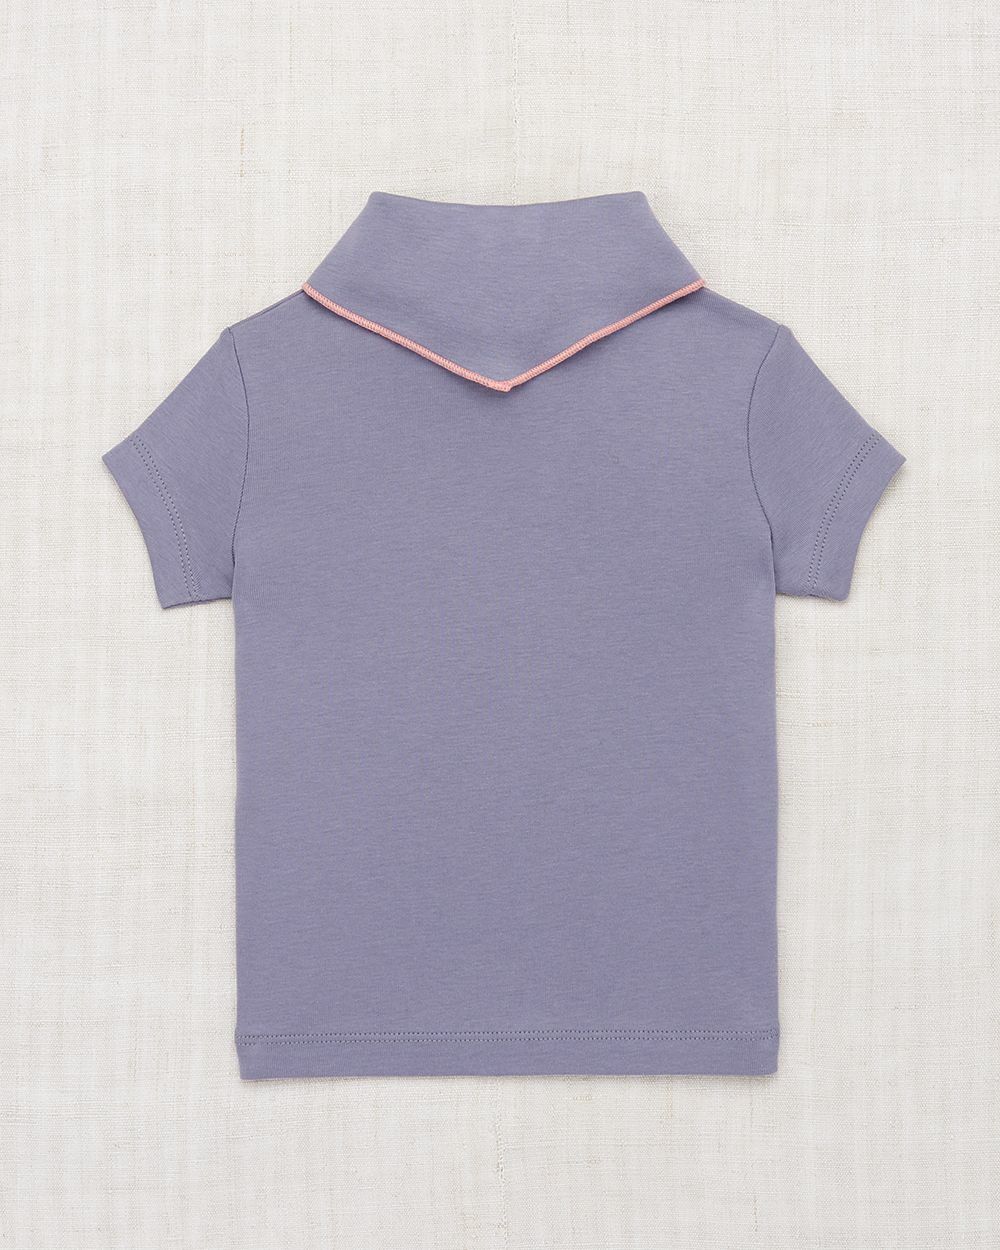 Misha & Puff - Scout Tee - Pewter